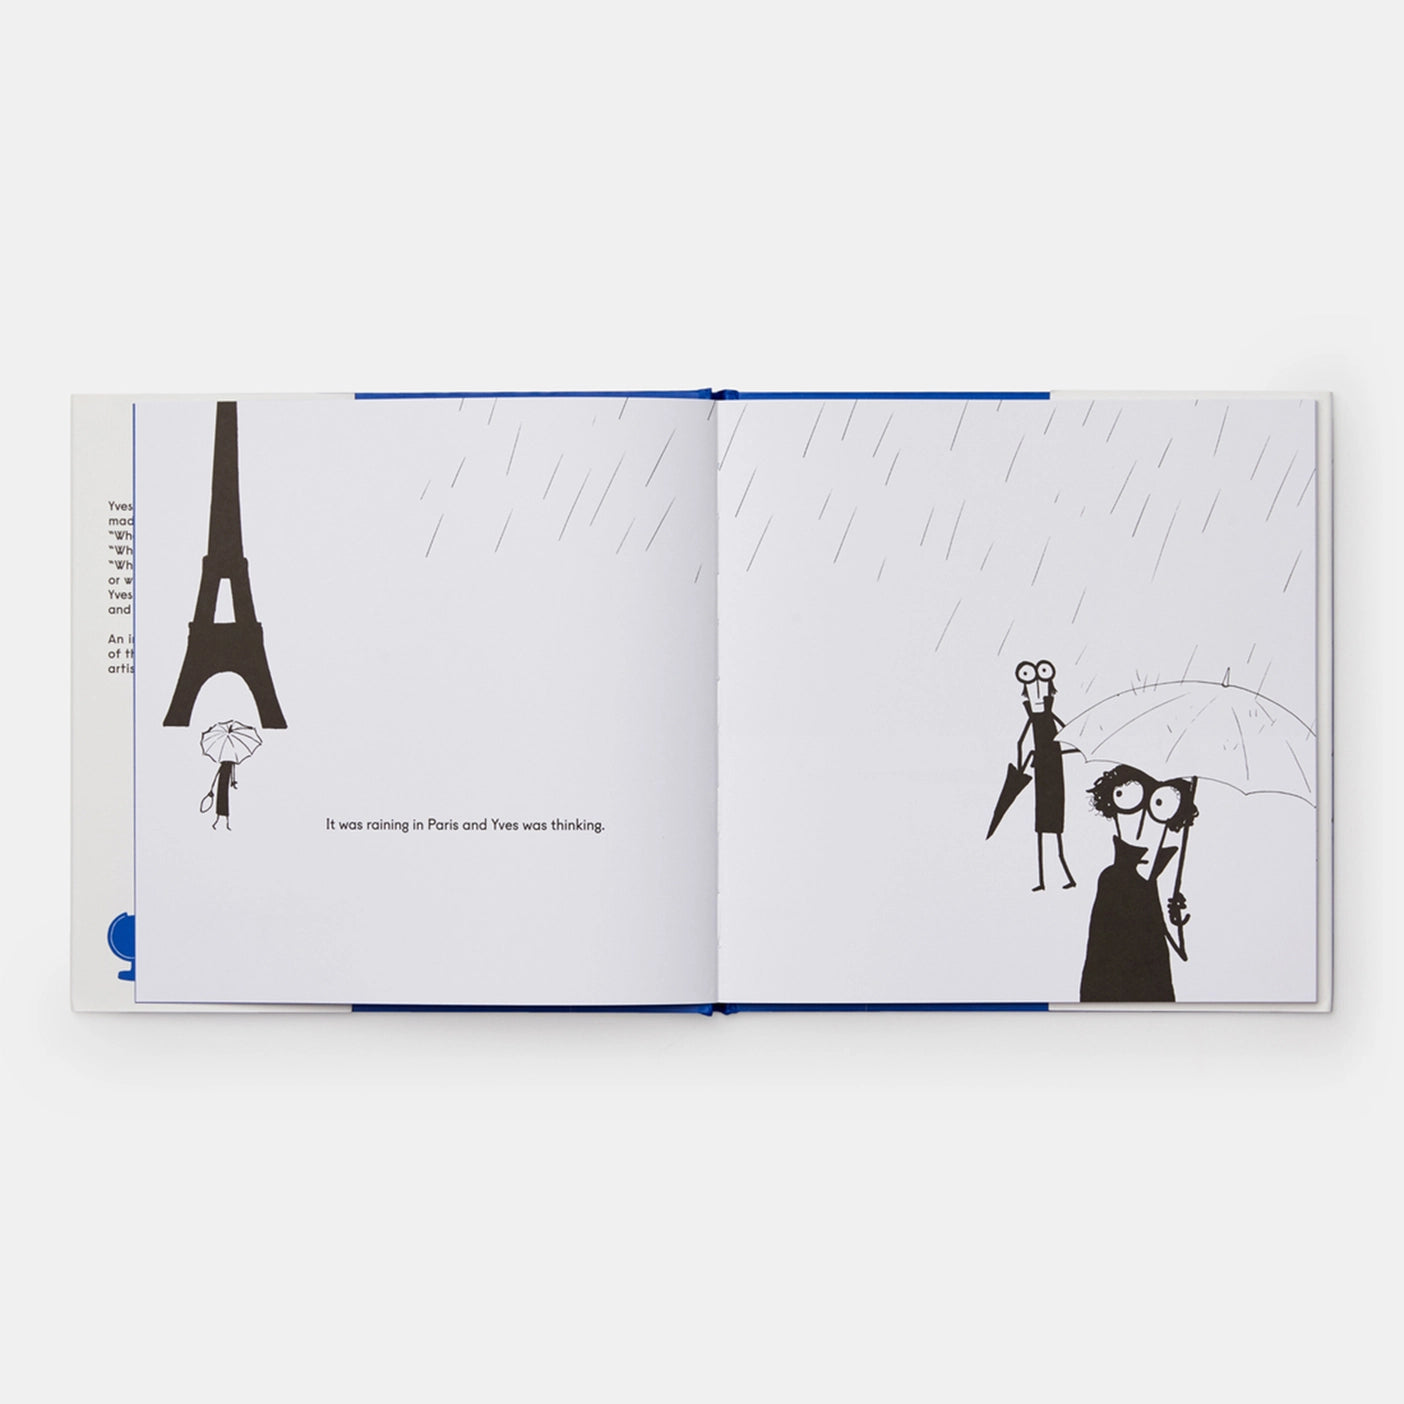 Yves Klein Painted Everything Blue and Wasn’t Sorry by Phaidon press